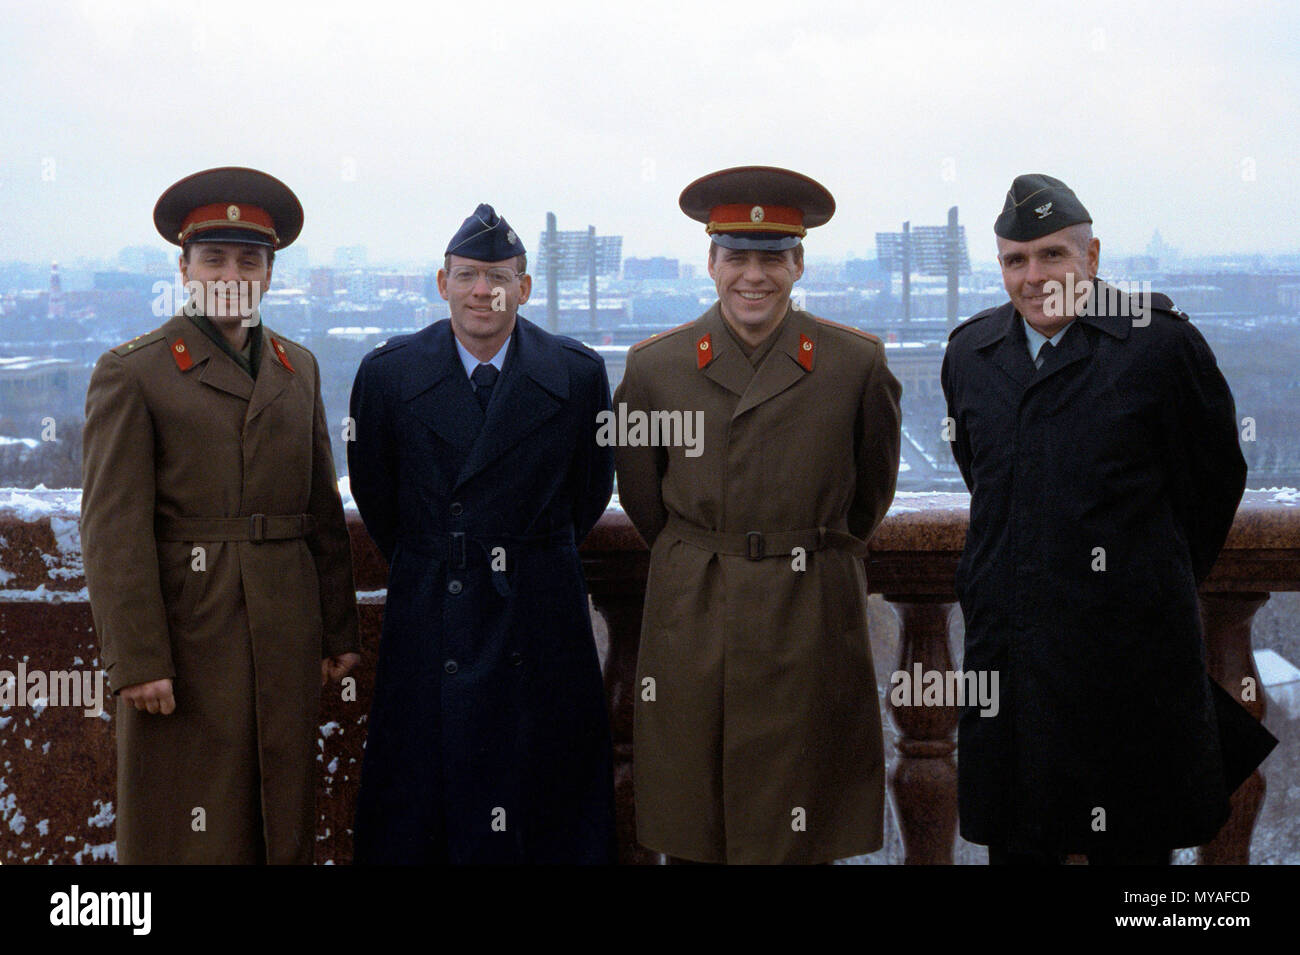 COL David Kiernan, right, chief of information, U.S. Army, and LTC Michael Perini, second from left, publisher of the U.S. Air Force magazine Airman, stand with their translators, CAPT Victor Bereznoy, left, and MAJ Ivan Skrylnik, on a bridge over the Moscow River.  The American officers are visiting the Soviet Union as part of a U.S./Soviet exchange program. Stock Photo